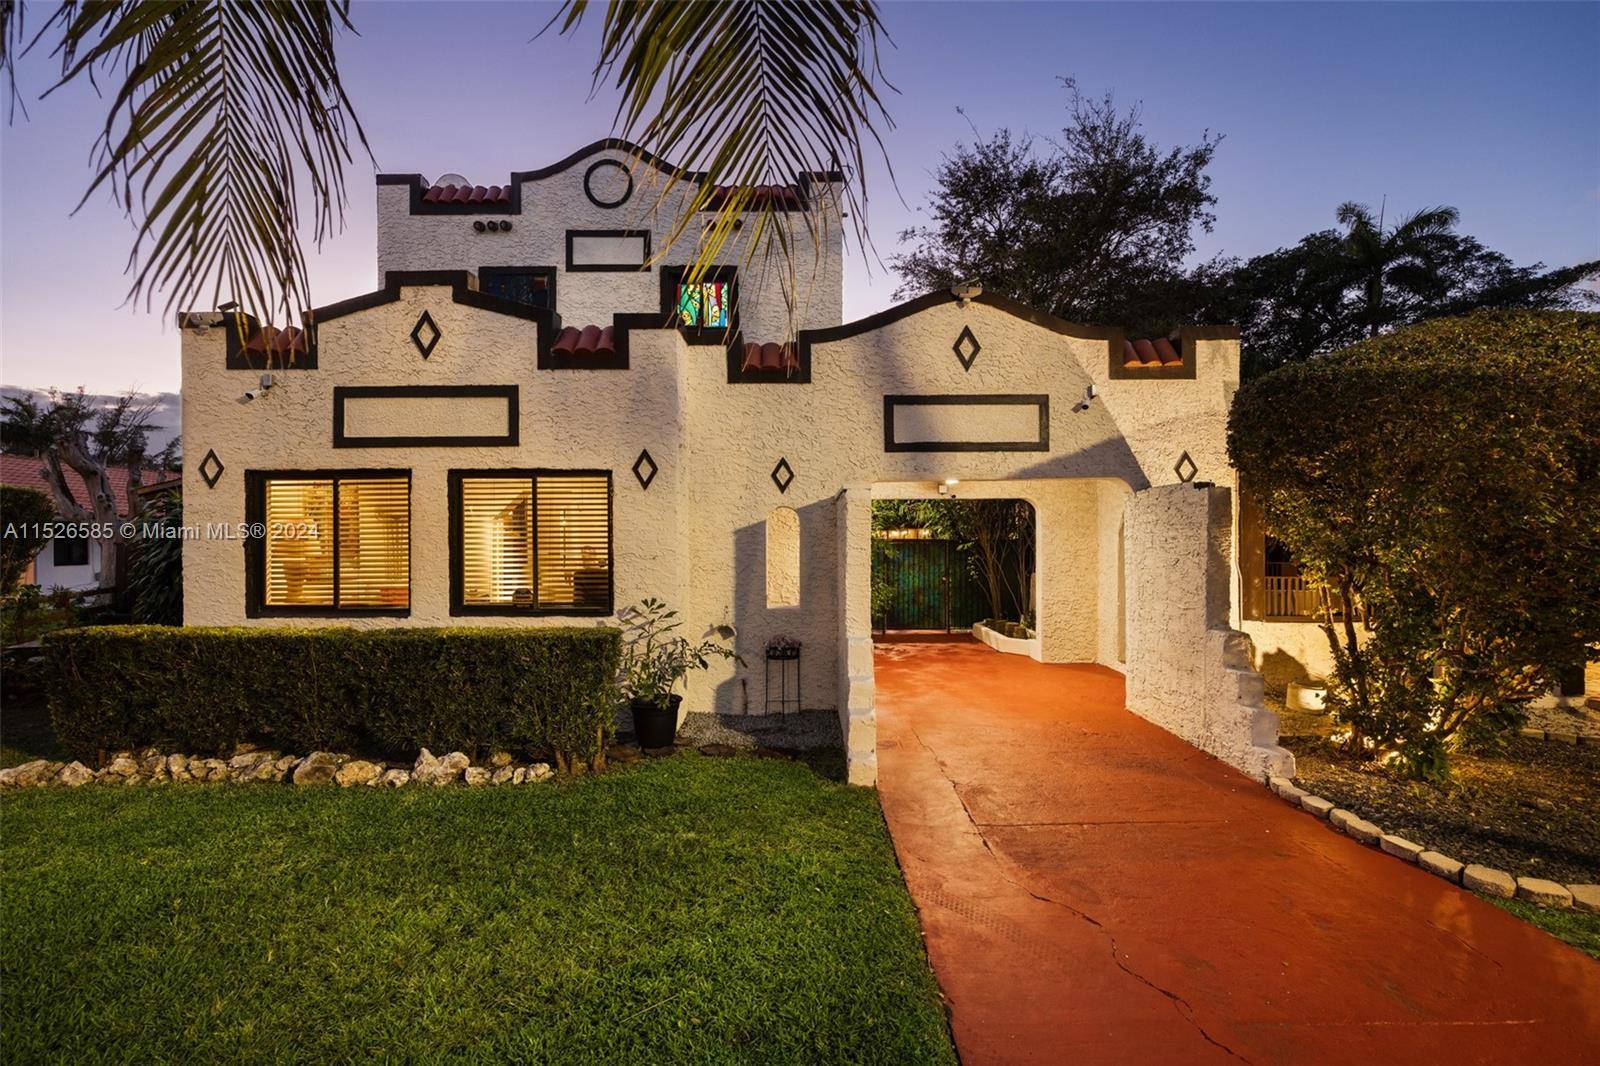 Discover the allure of this 1920s mission style gem in Biscayne Park.